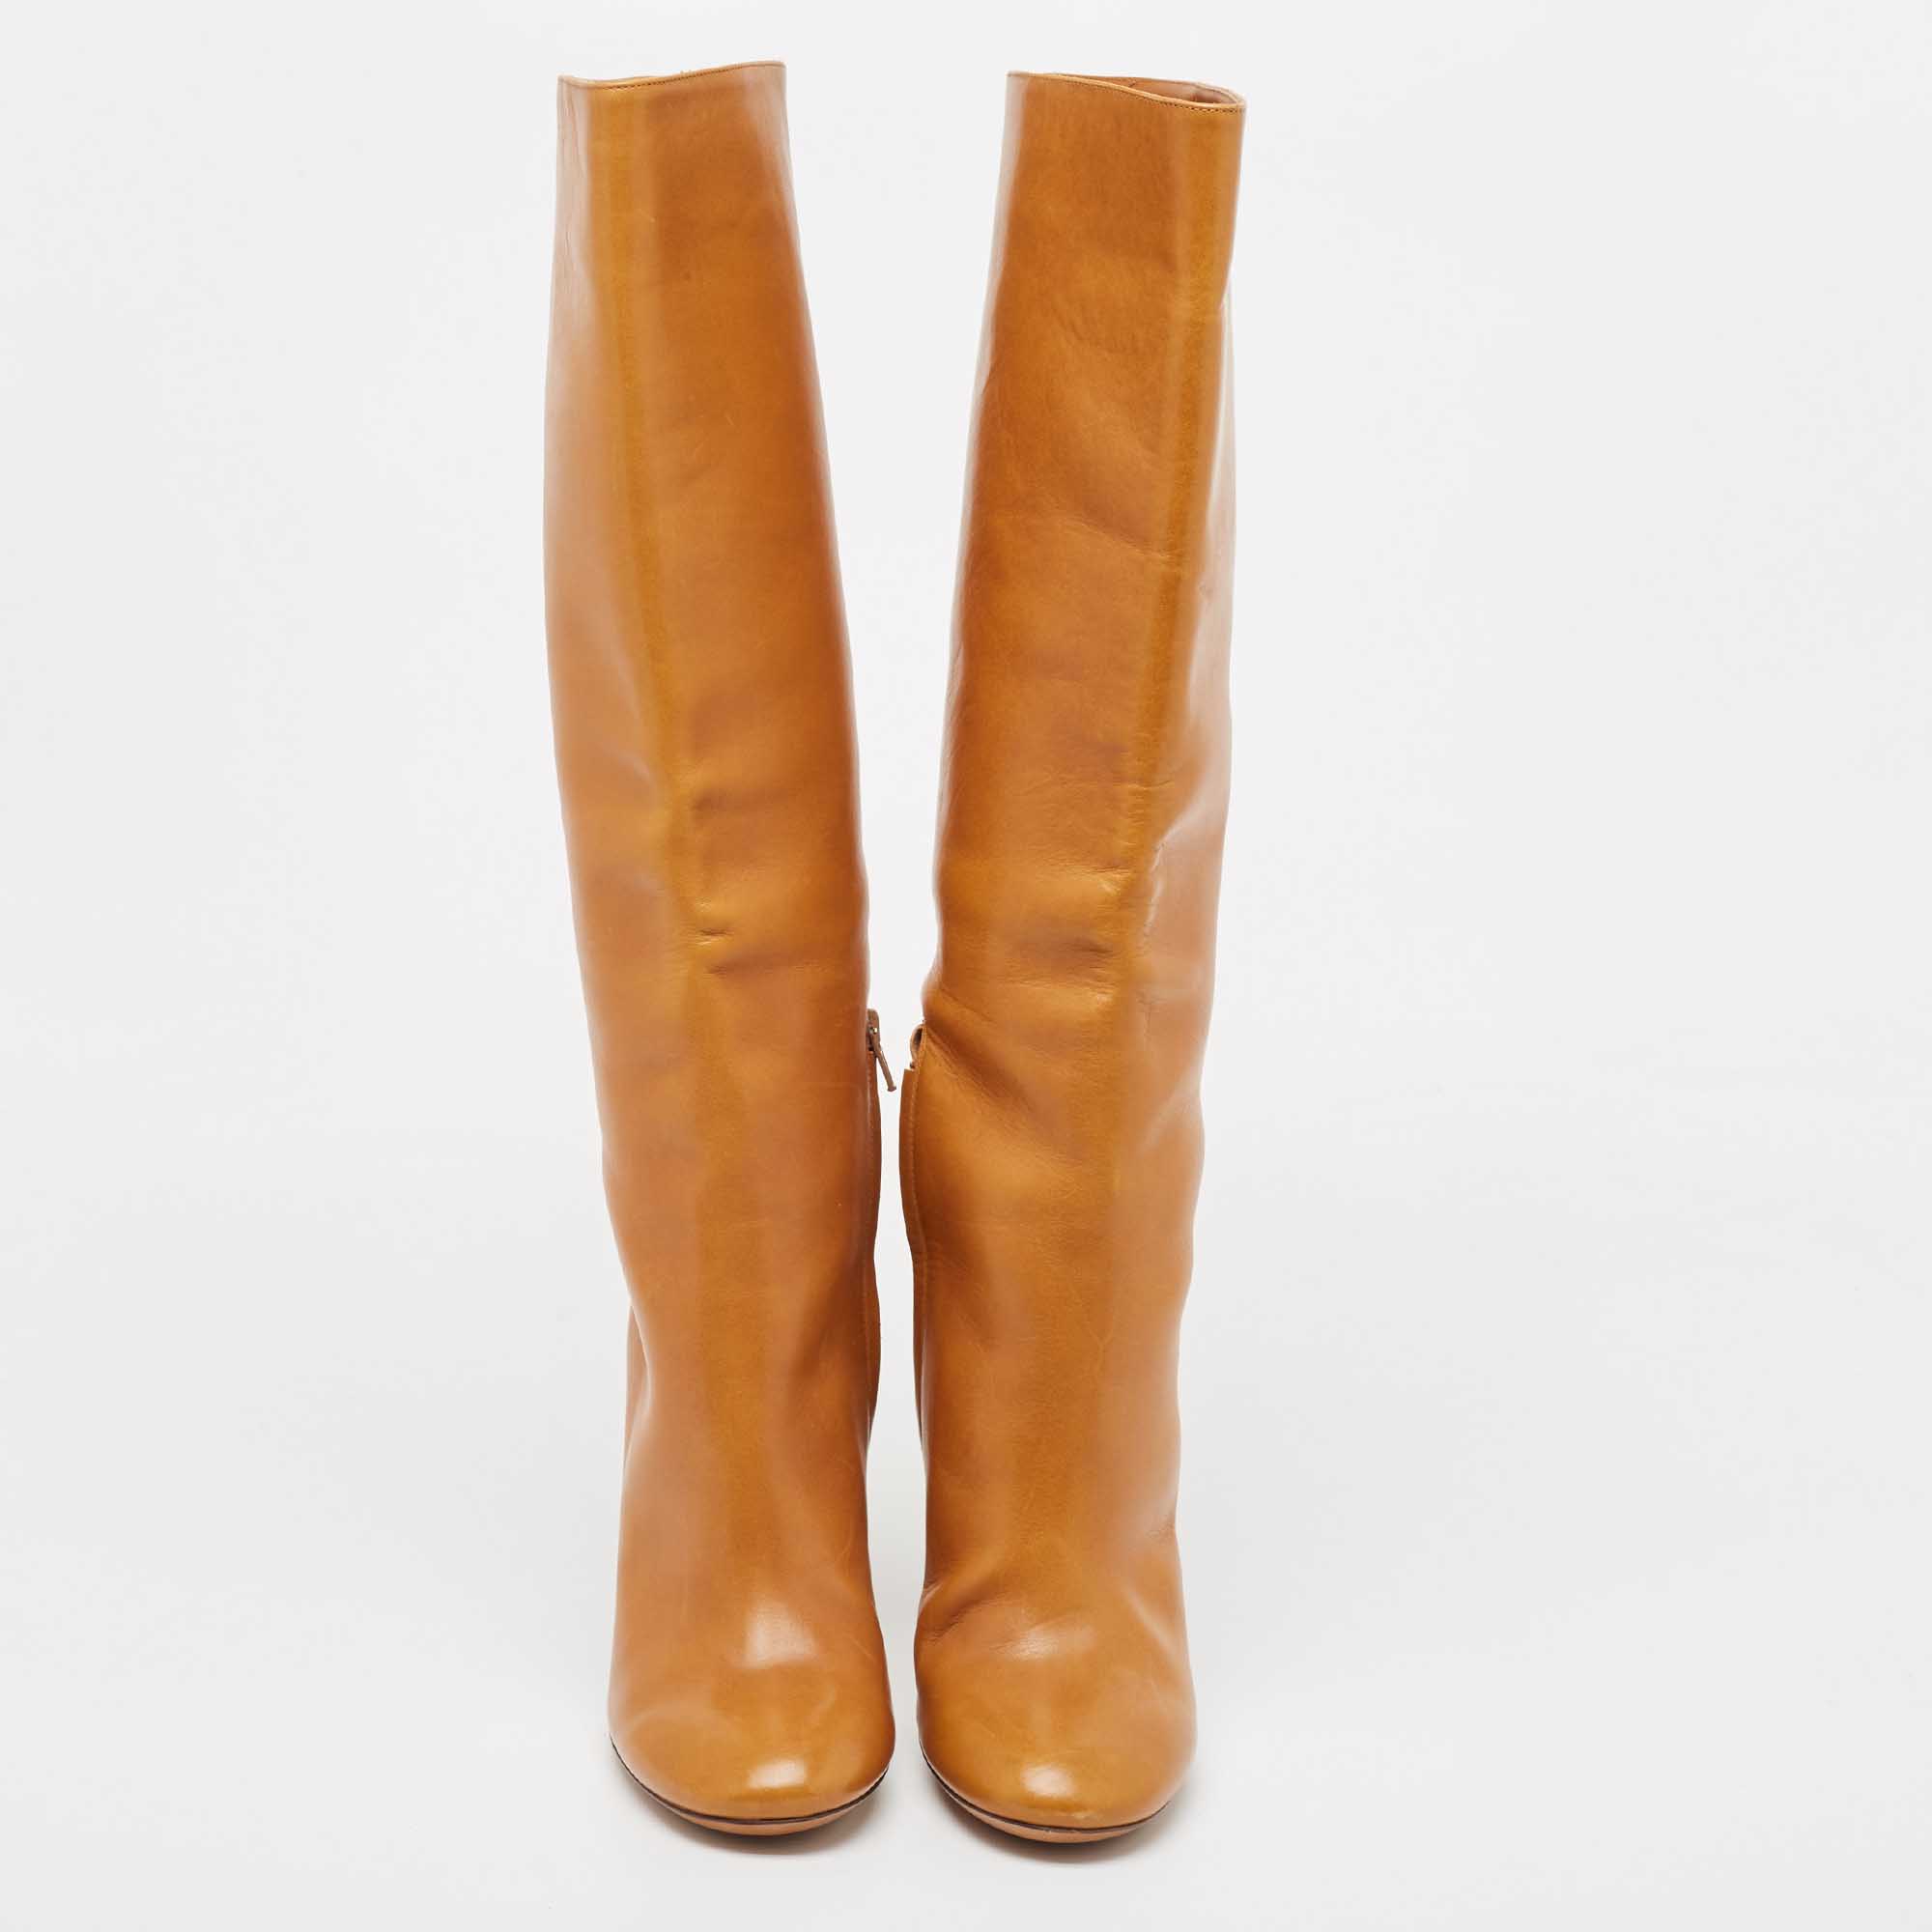 Chloe Brown Leather Knee Length Boots Size 41